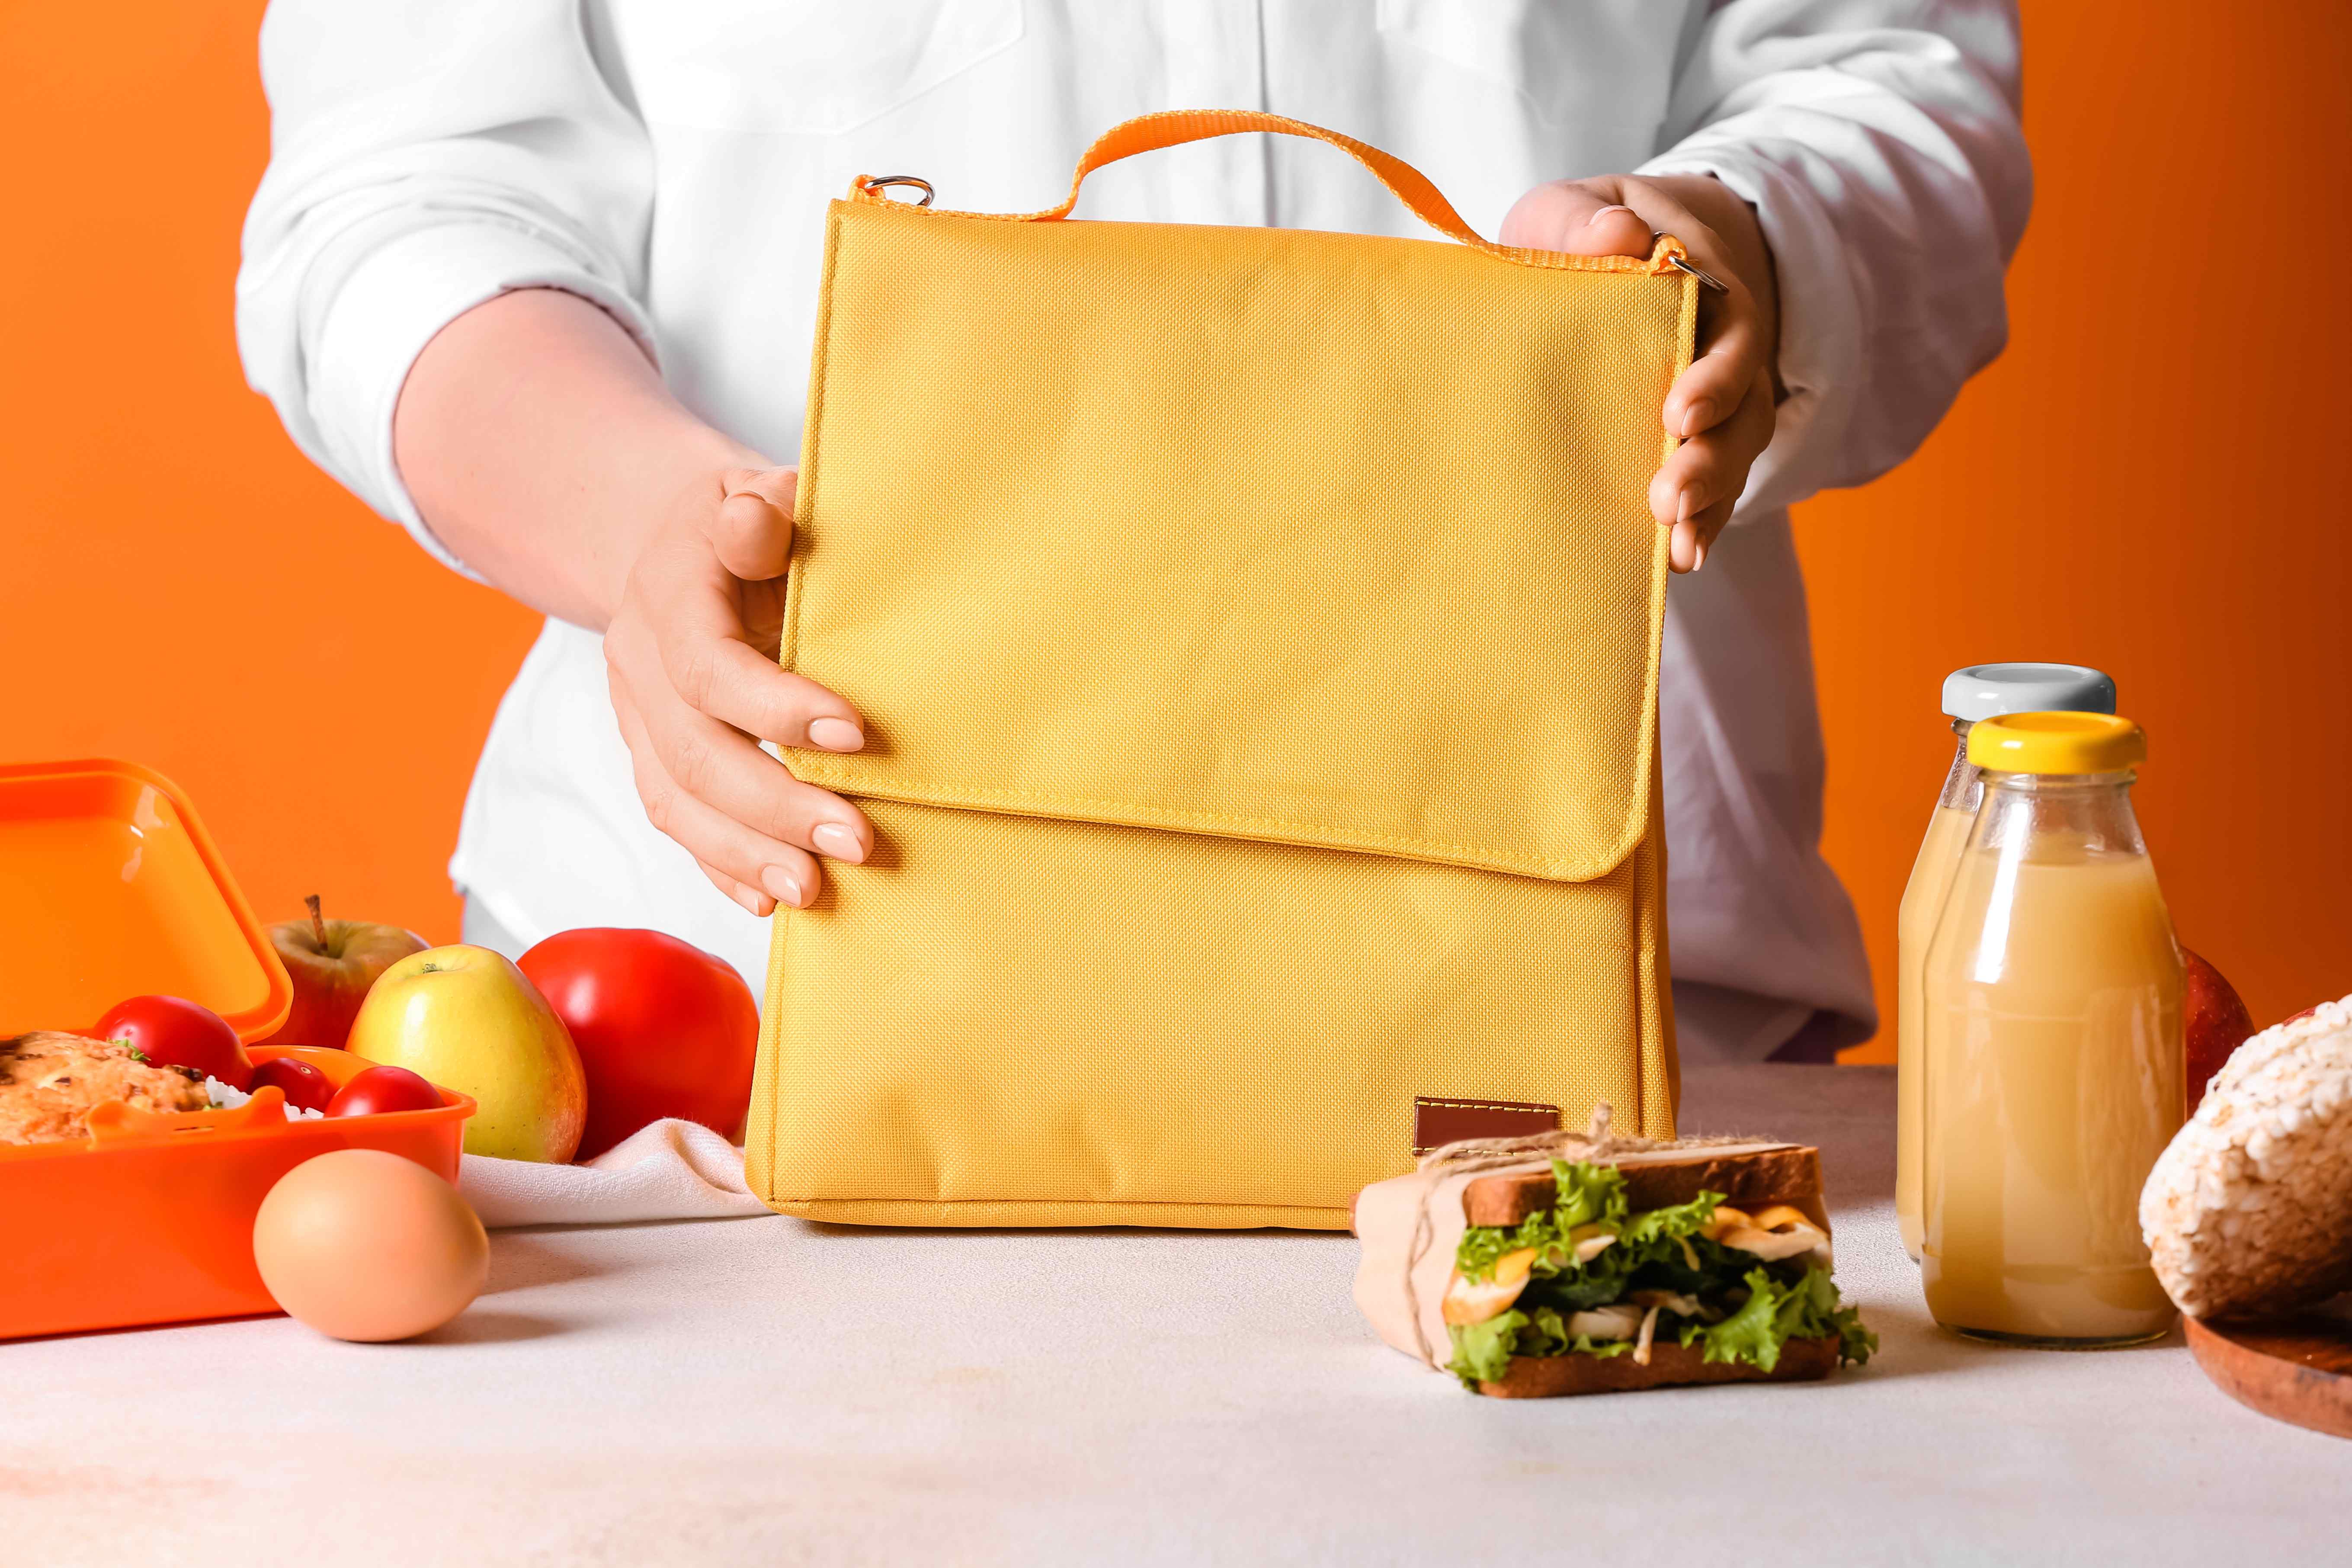 A woman packs herself a healthy meal for work in a stylish yellow lunch bag.